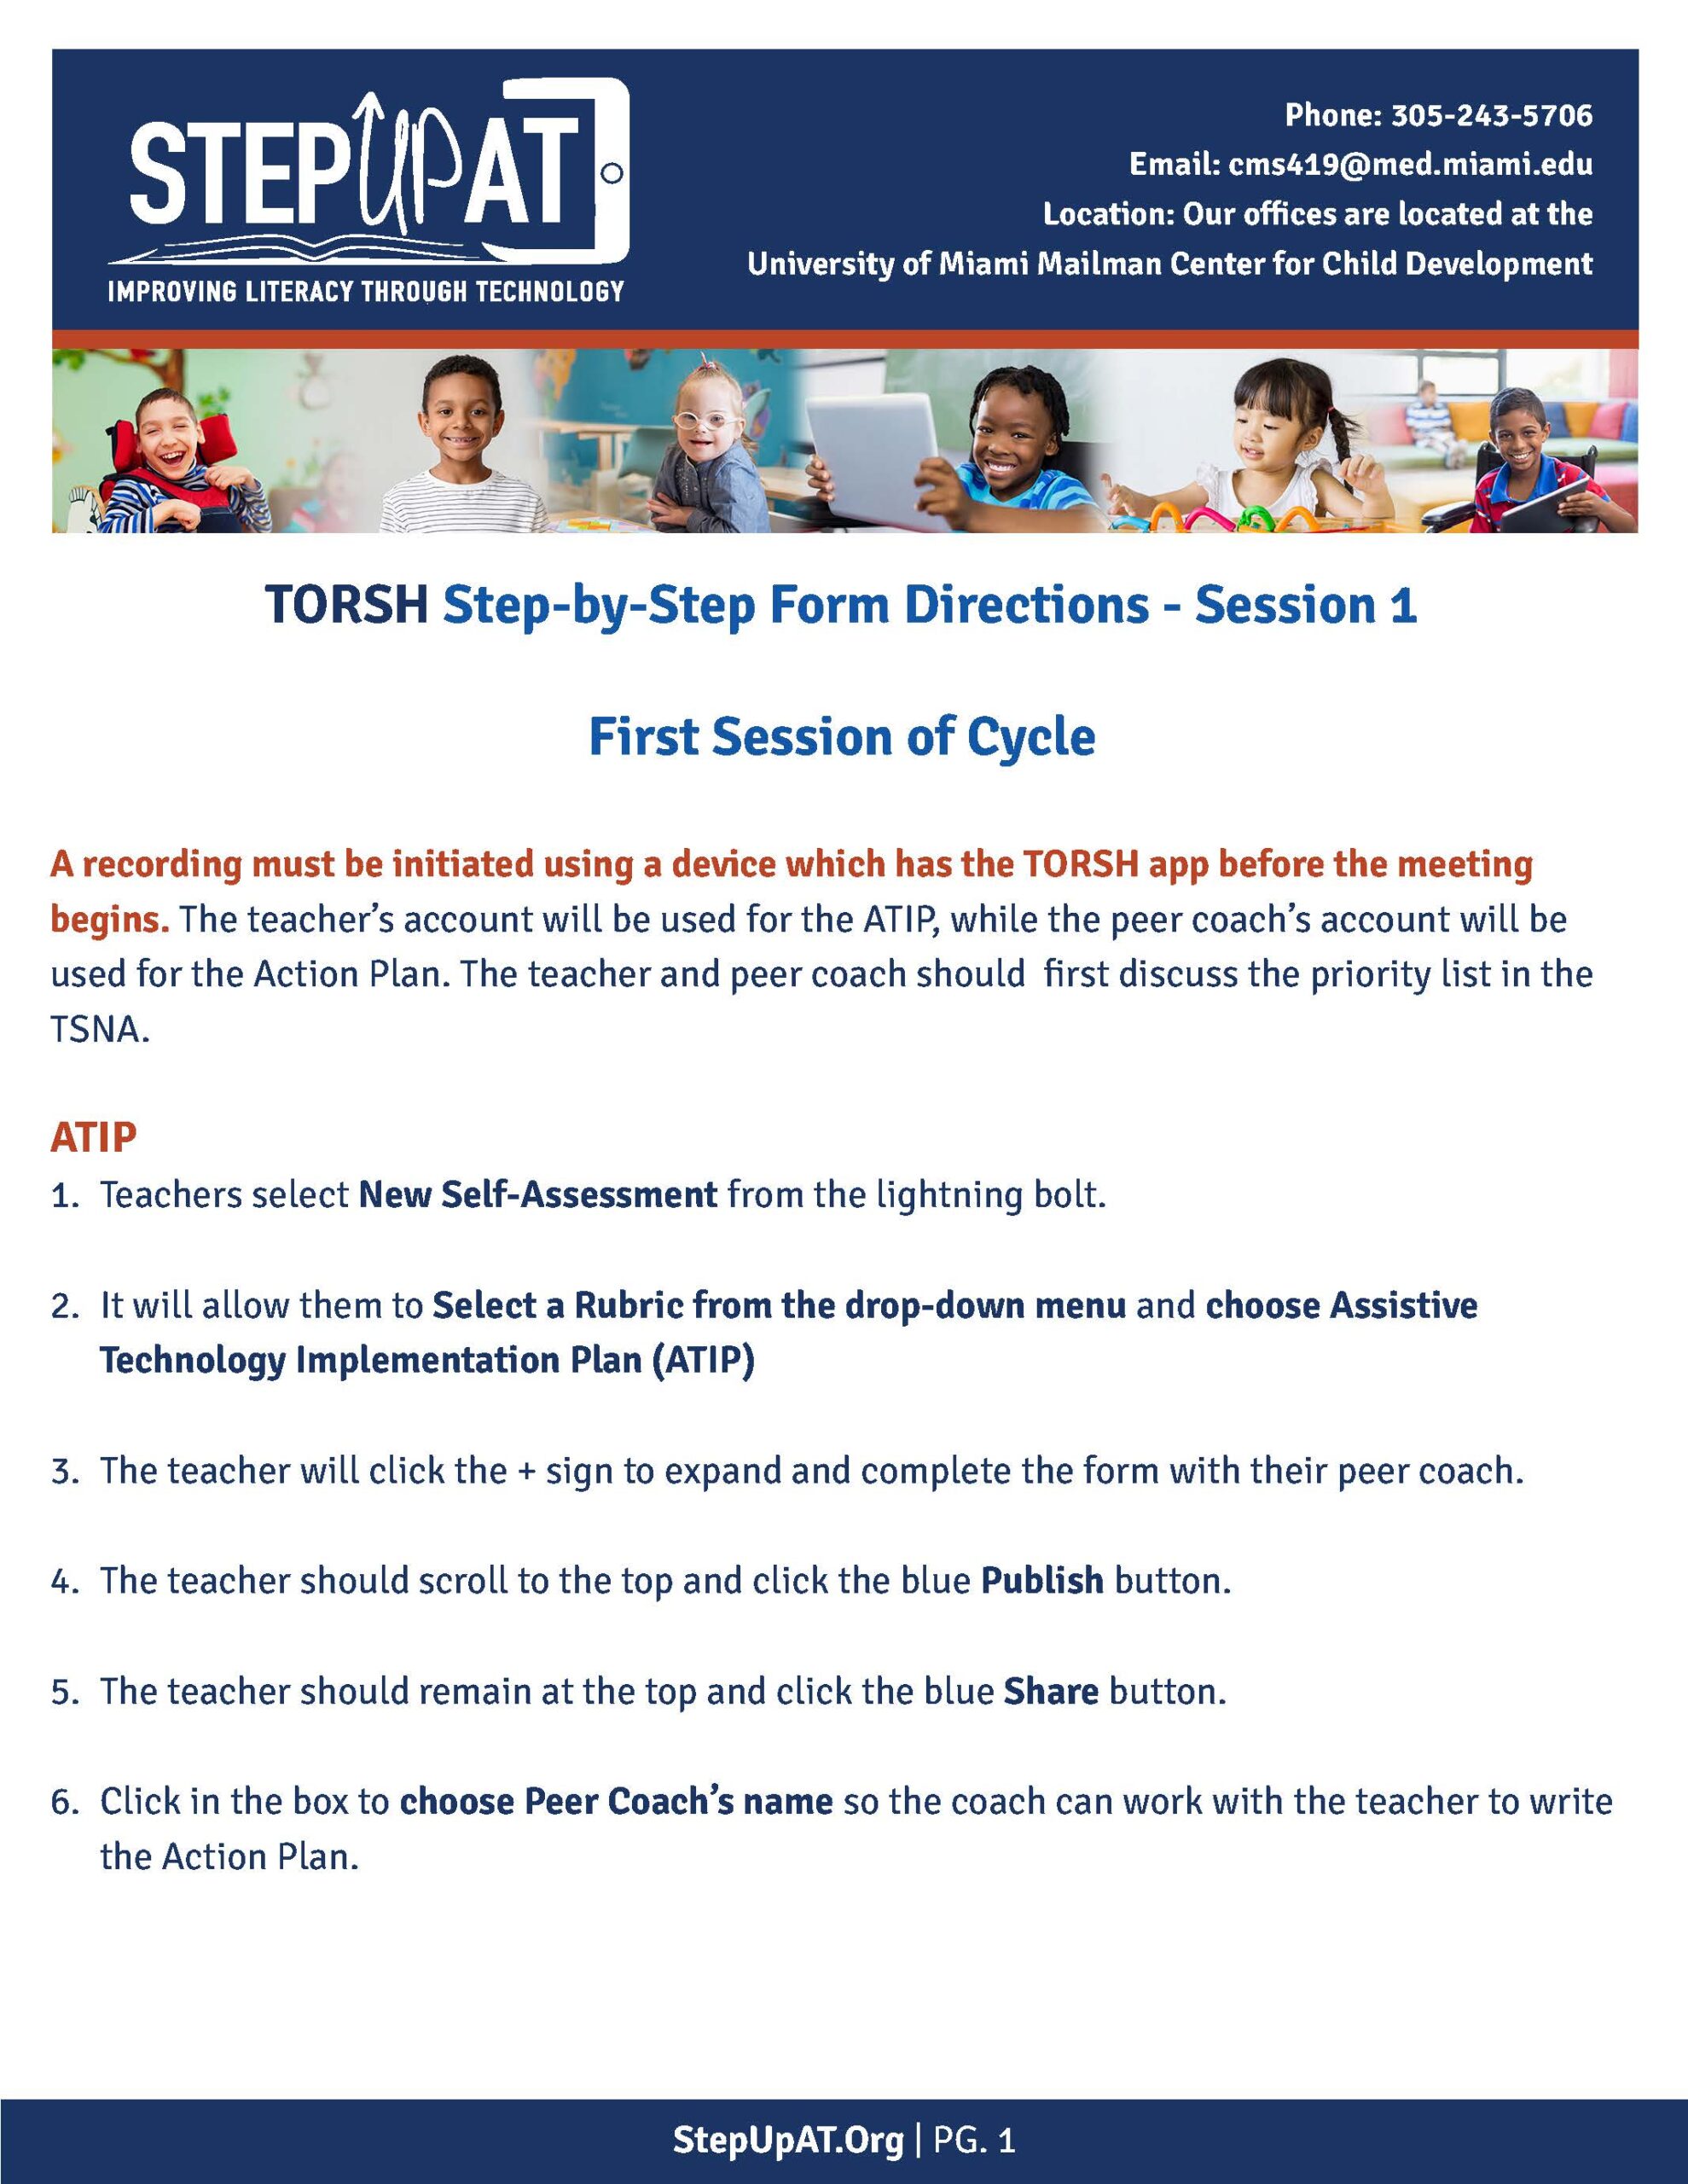 Torsh Step by Step guide first page